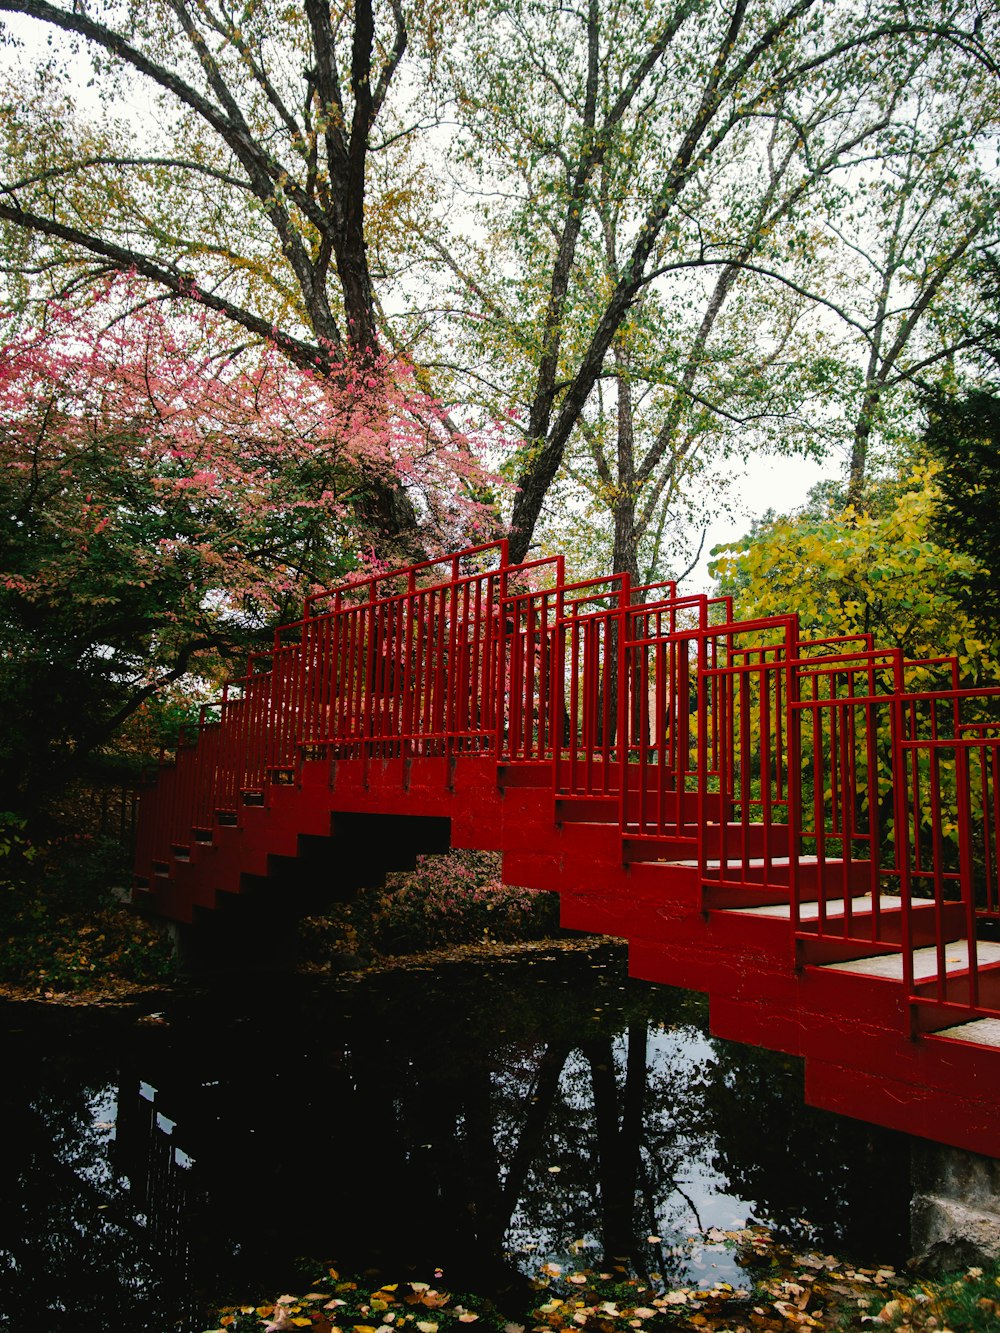 red bridge over river surrounded by trees